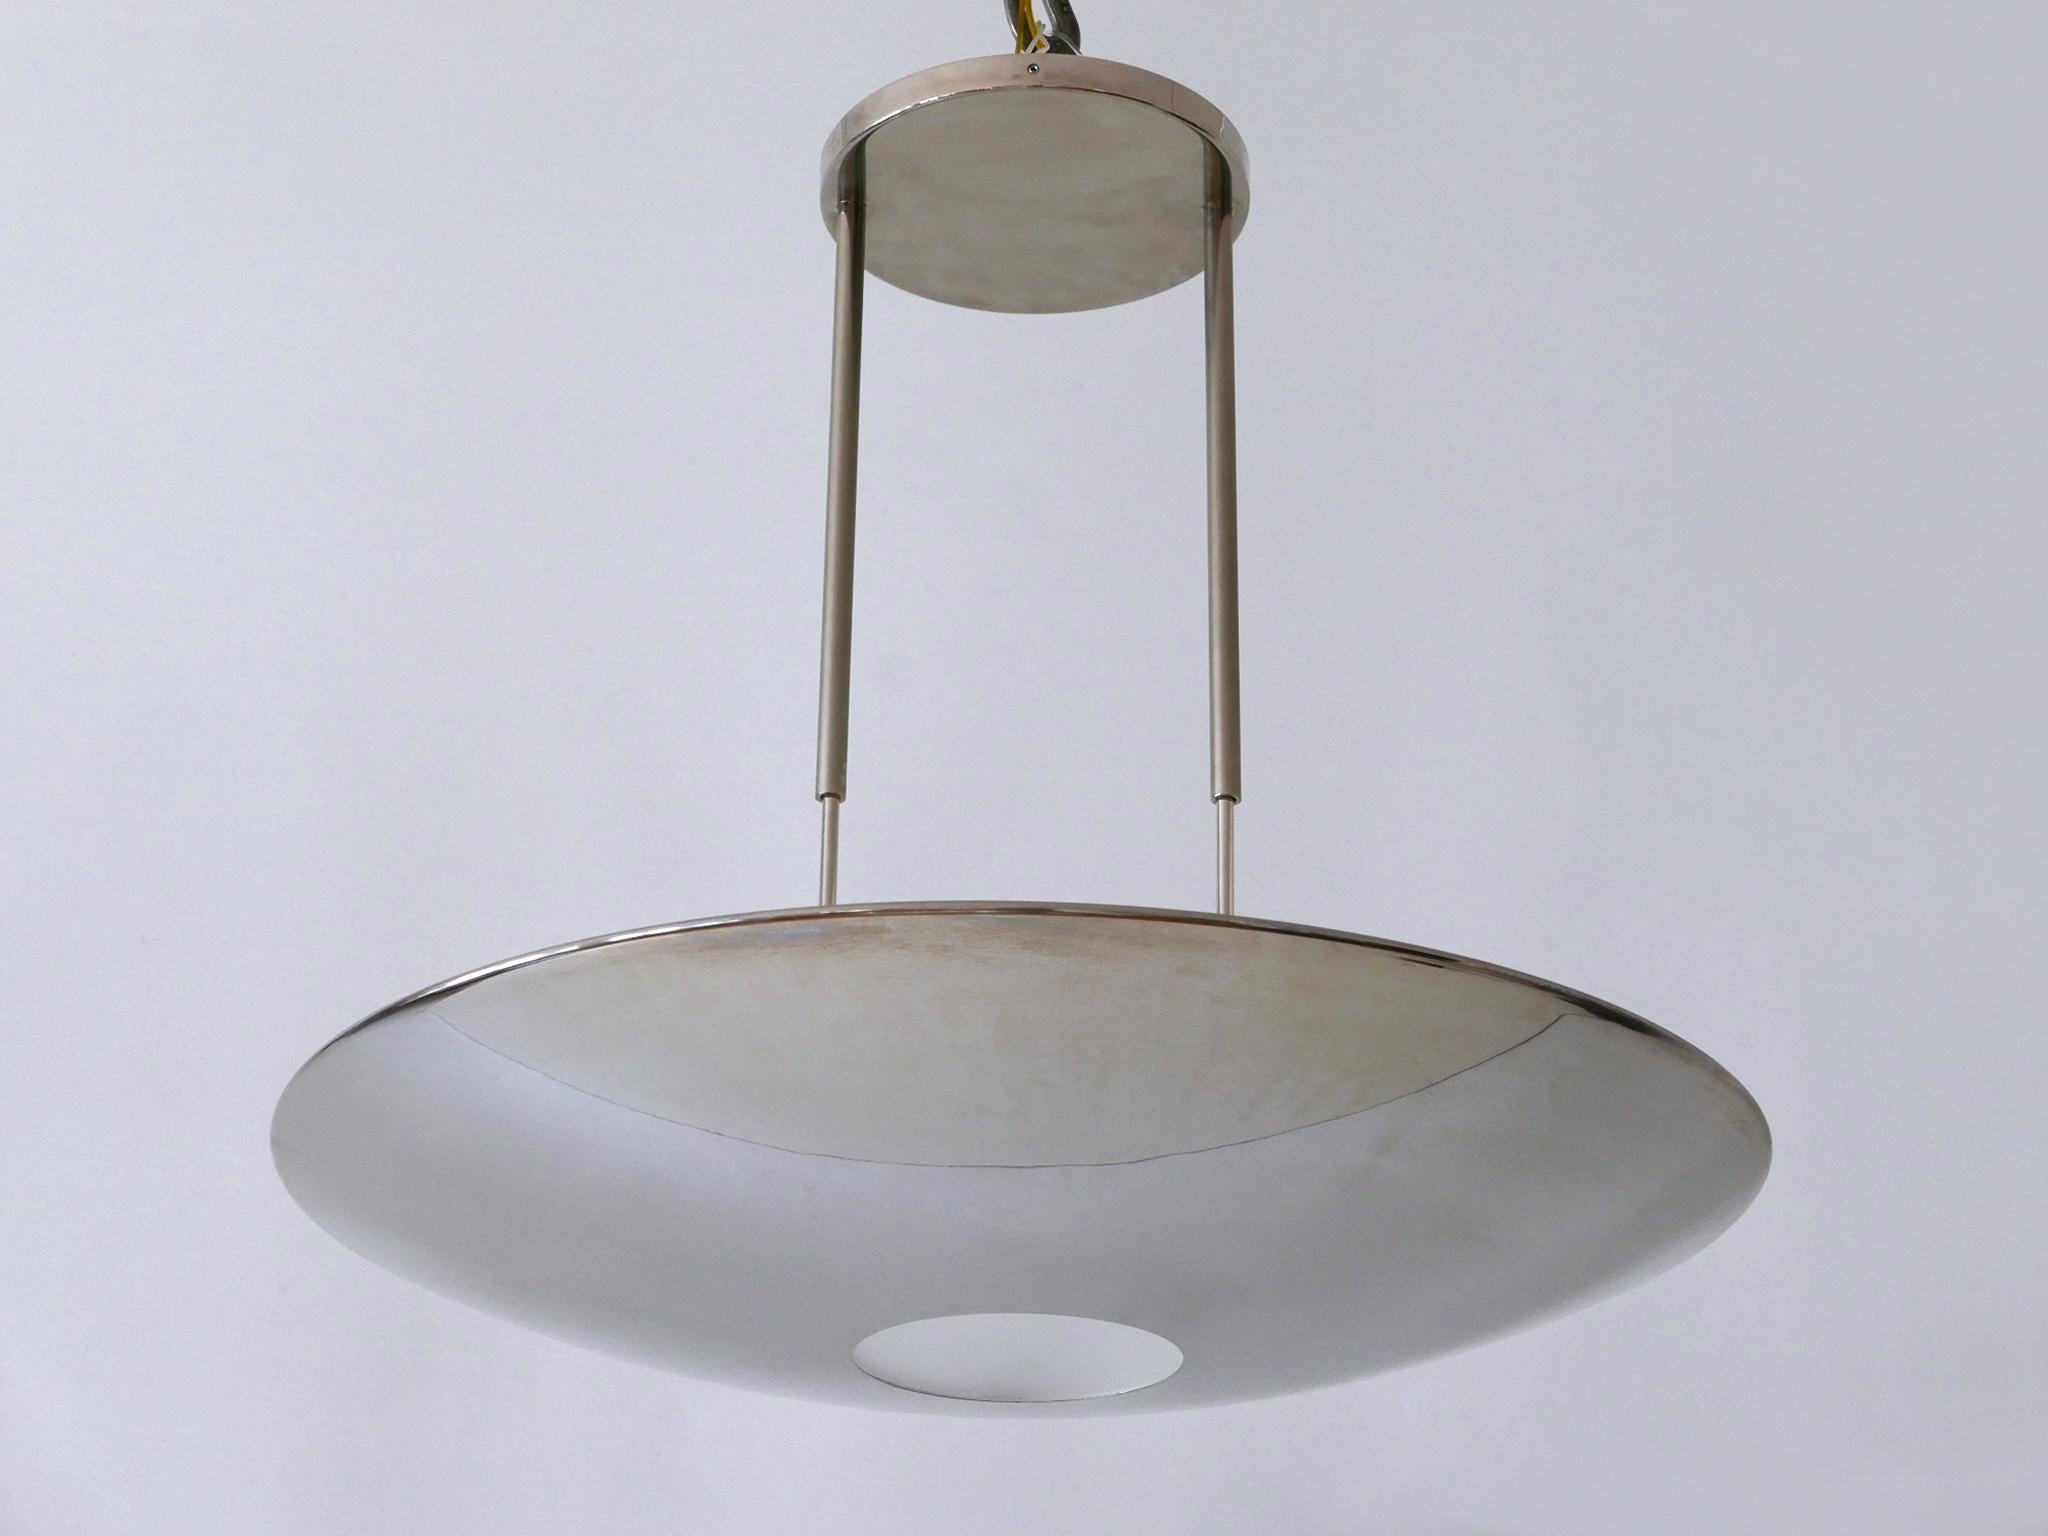 Late 20th Century Modernist Brass Pendant Lamp or Ceiling Fixture by Florian Schulz Germany 1980s For Sale